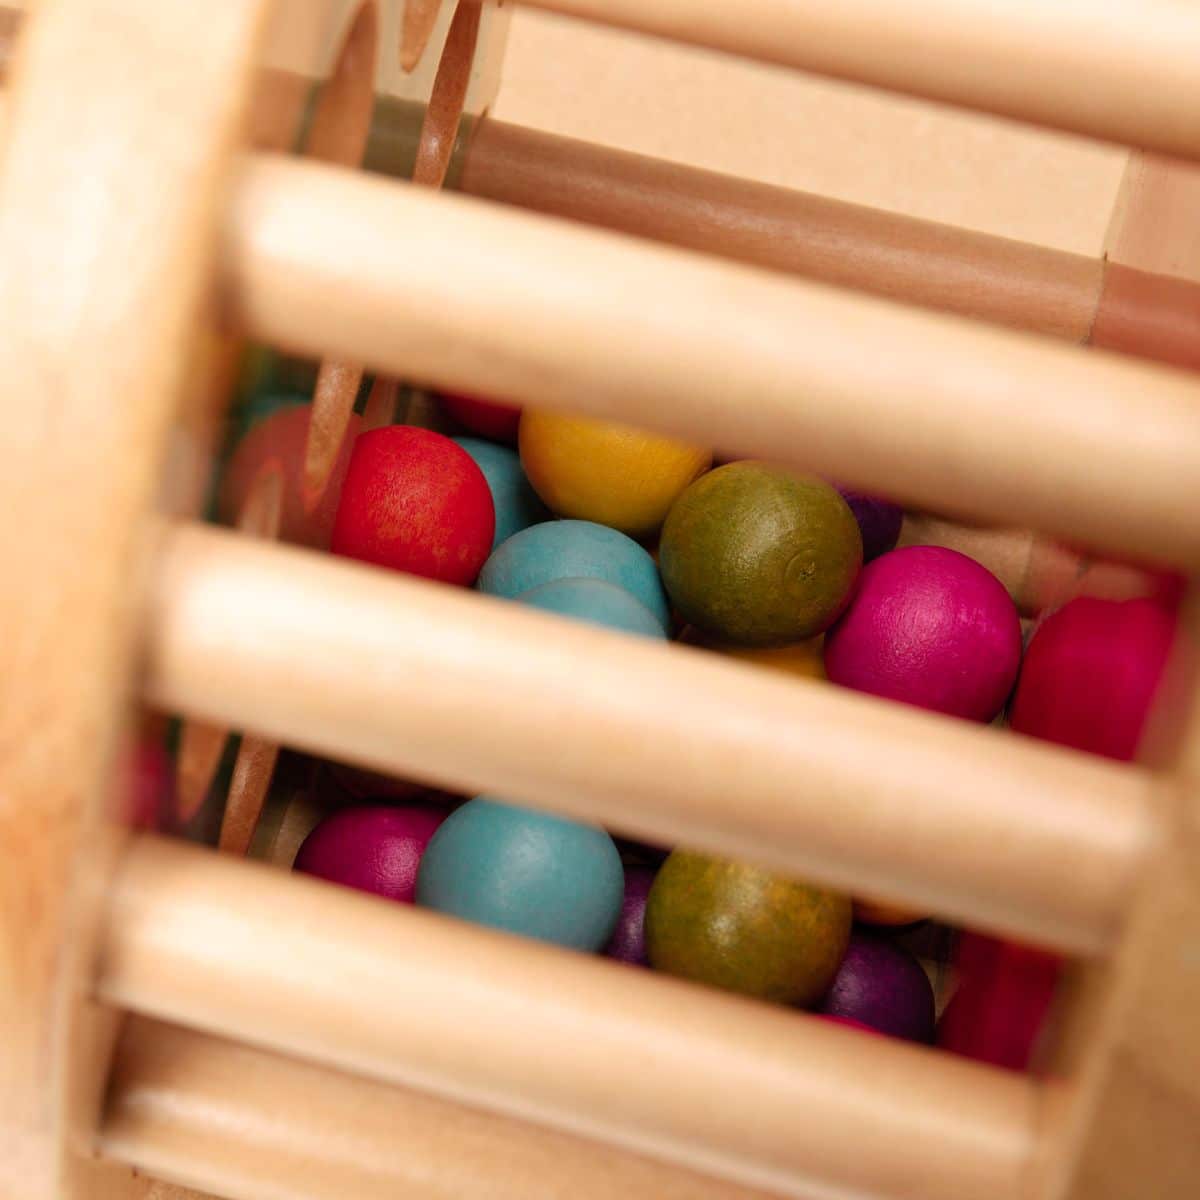 Rolling tower filled with colorful wooden marbles